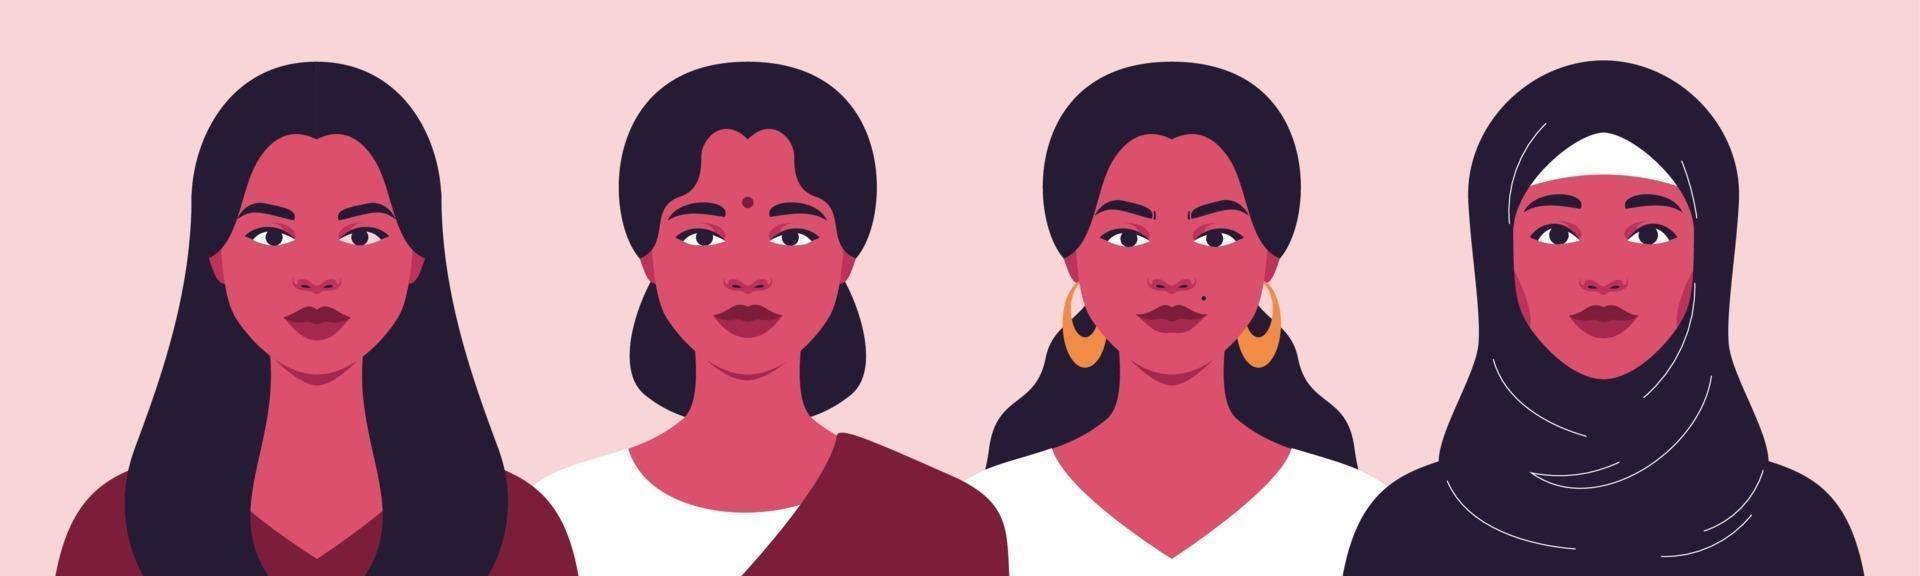 A group of women of different nationalities. Sisterhood concept vector